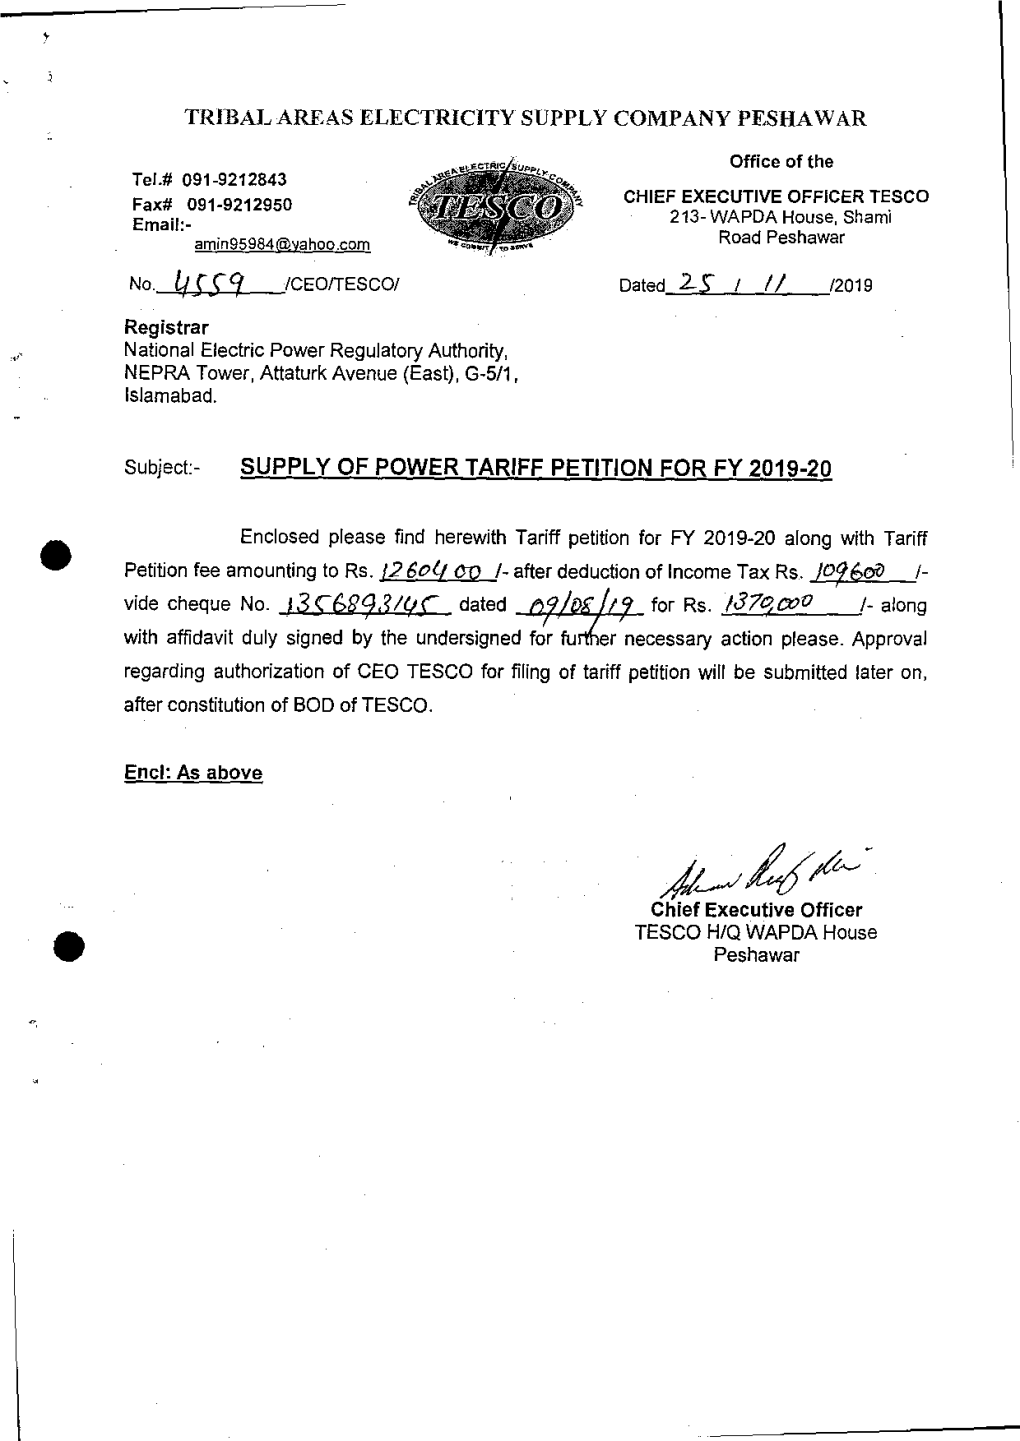 Supply of Power Tariff Petition for Fy 2019 -20